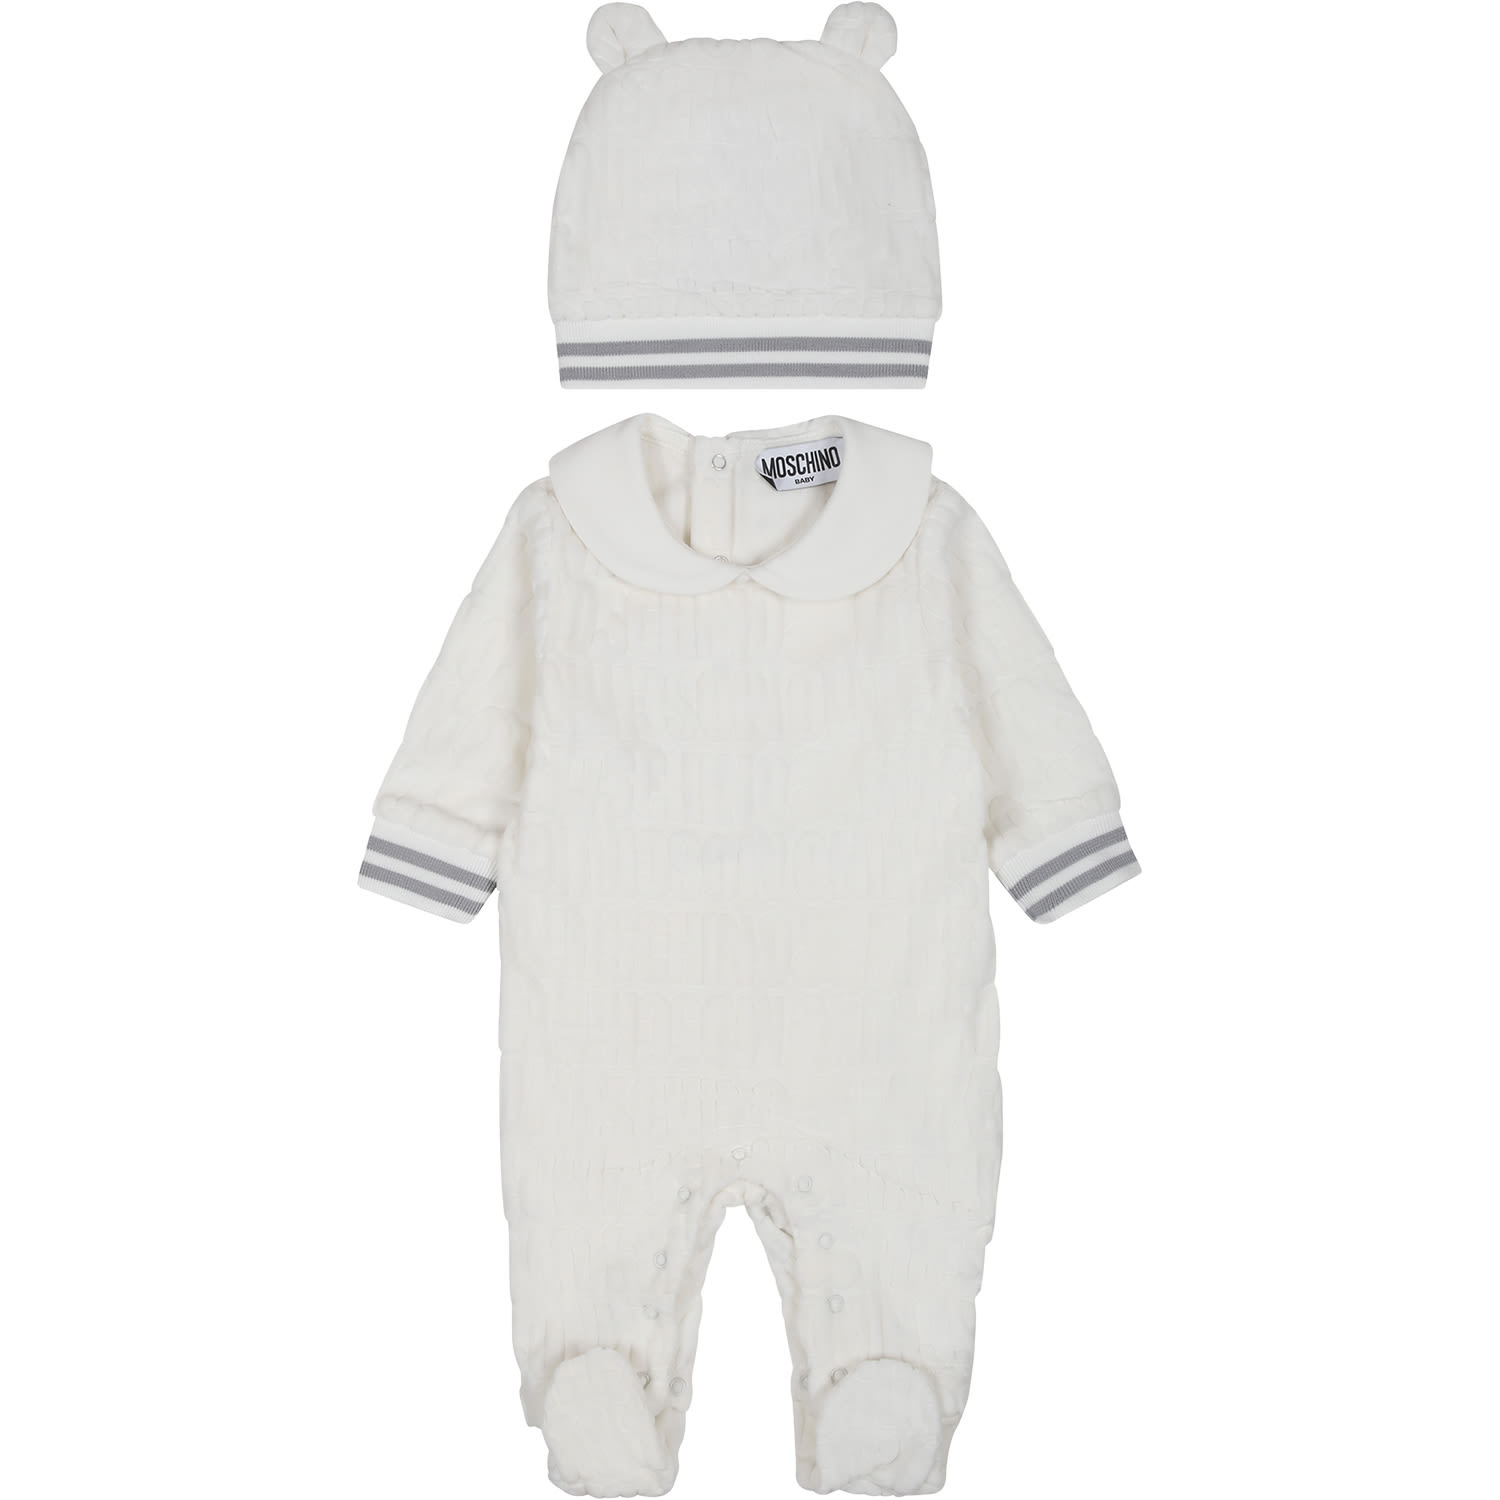 Moschino White Suit For Babykids With Teddy Bear